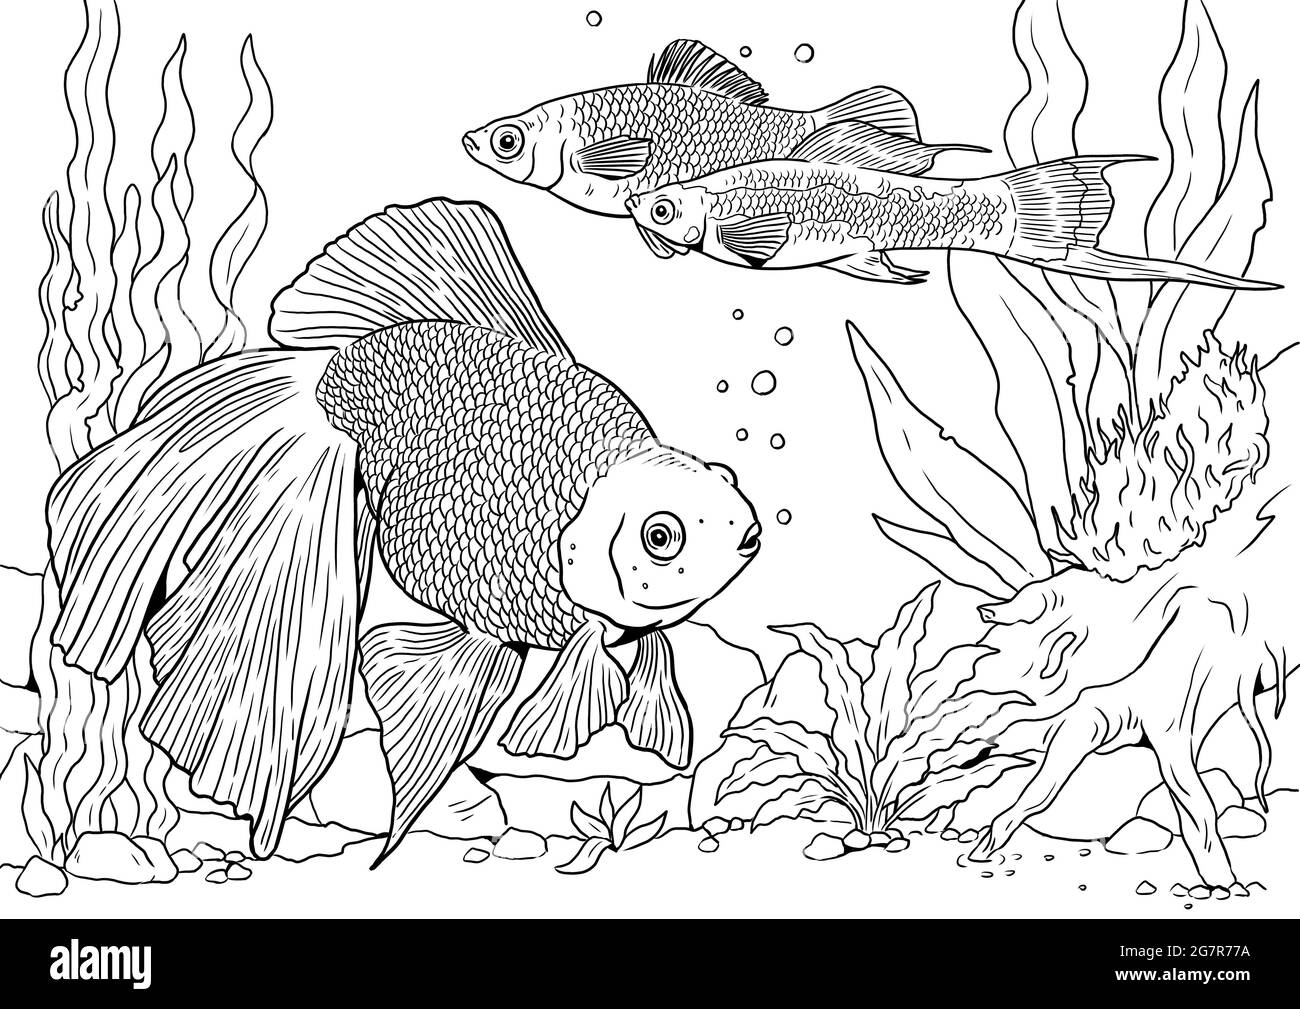 Aquarium with Veiltail and swordtail for coloring. Colorful tropical fish templates. Coloring book for children and adults. Stock Photo